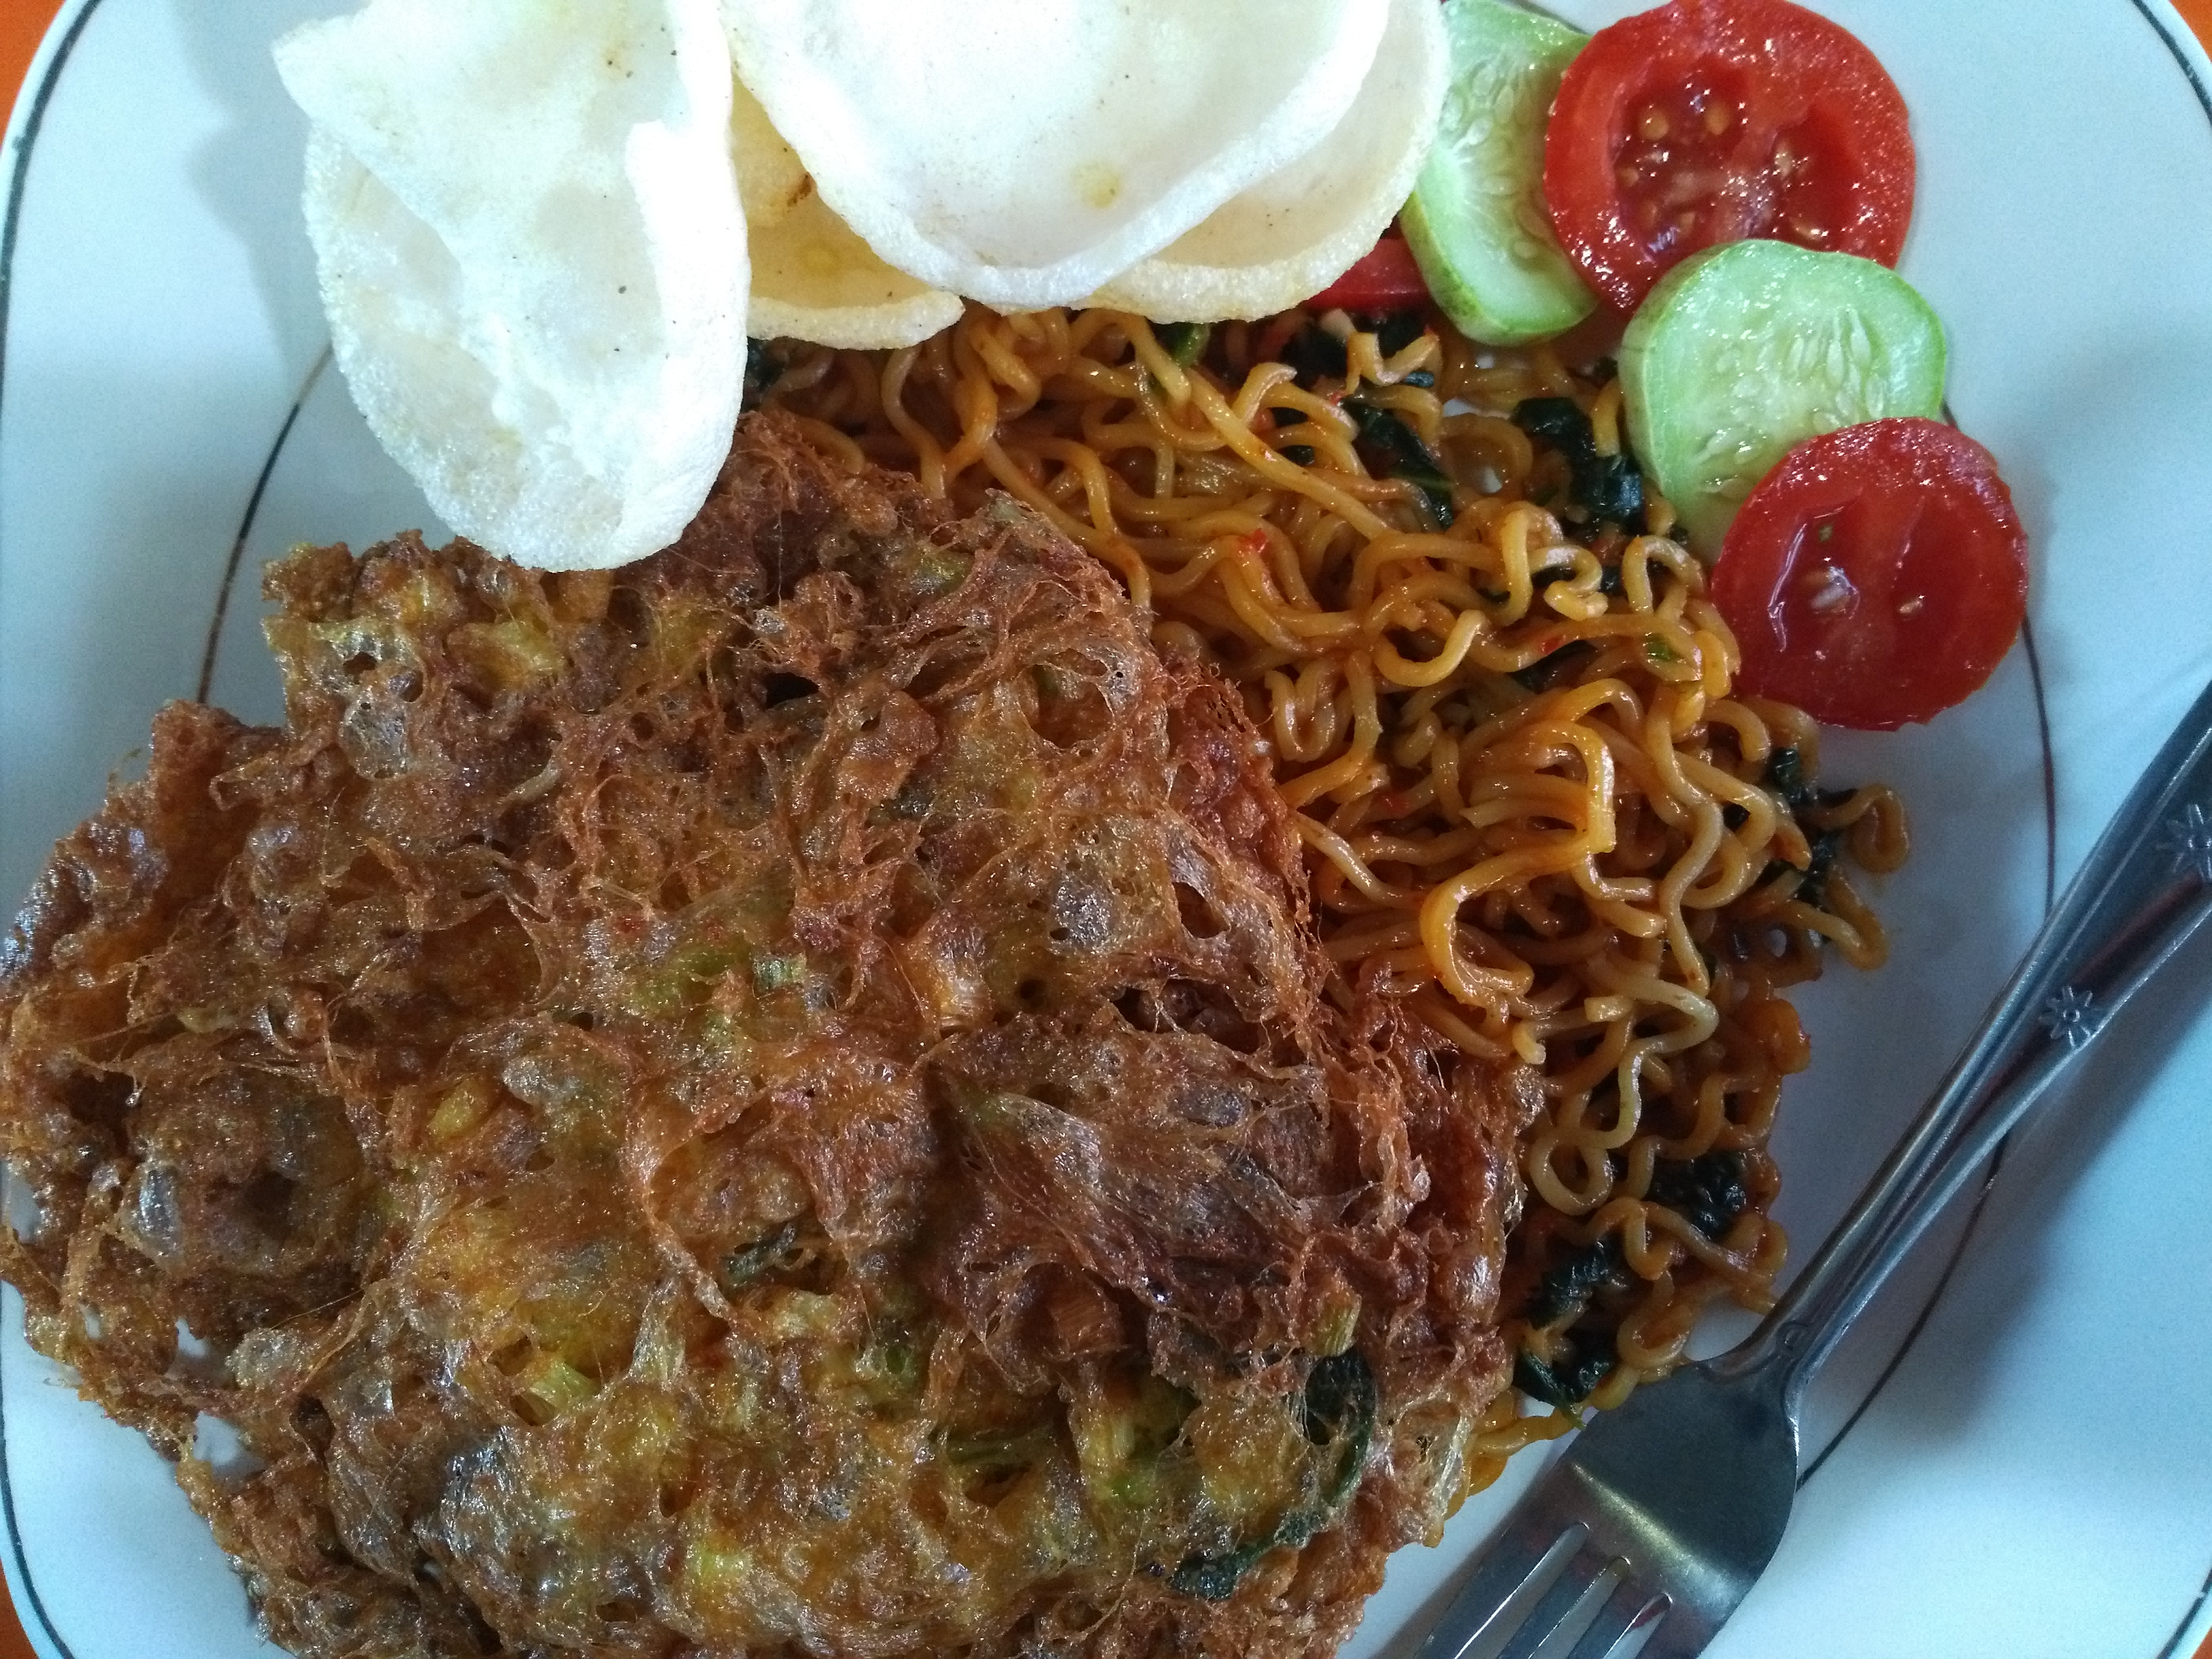 Another iteration of <i>mie goreng telur</i> (fried noodles w/ egg).